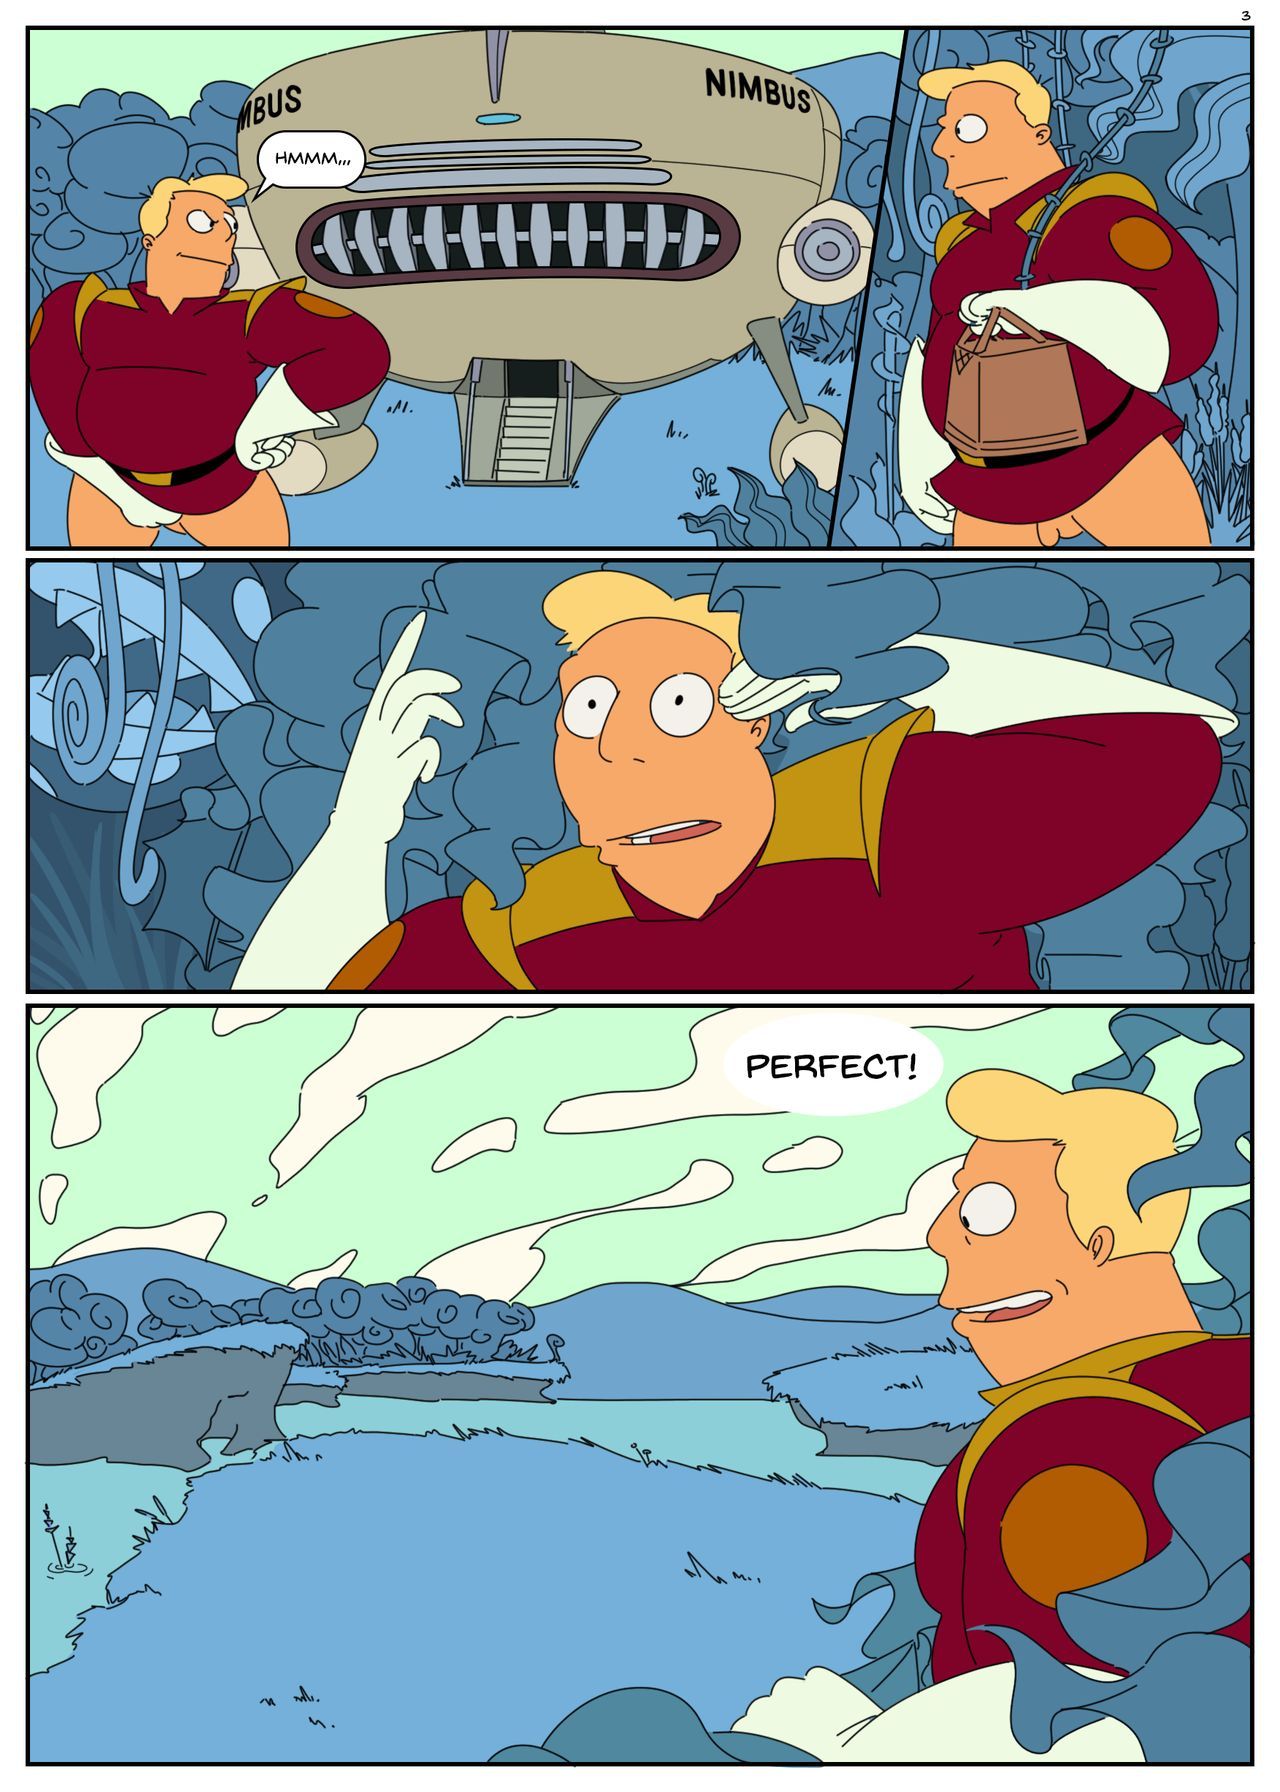 ZAPP BRANNIGAN & THE MISTERIOUS OMICRONIAN 4